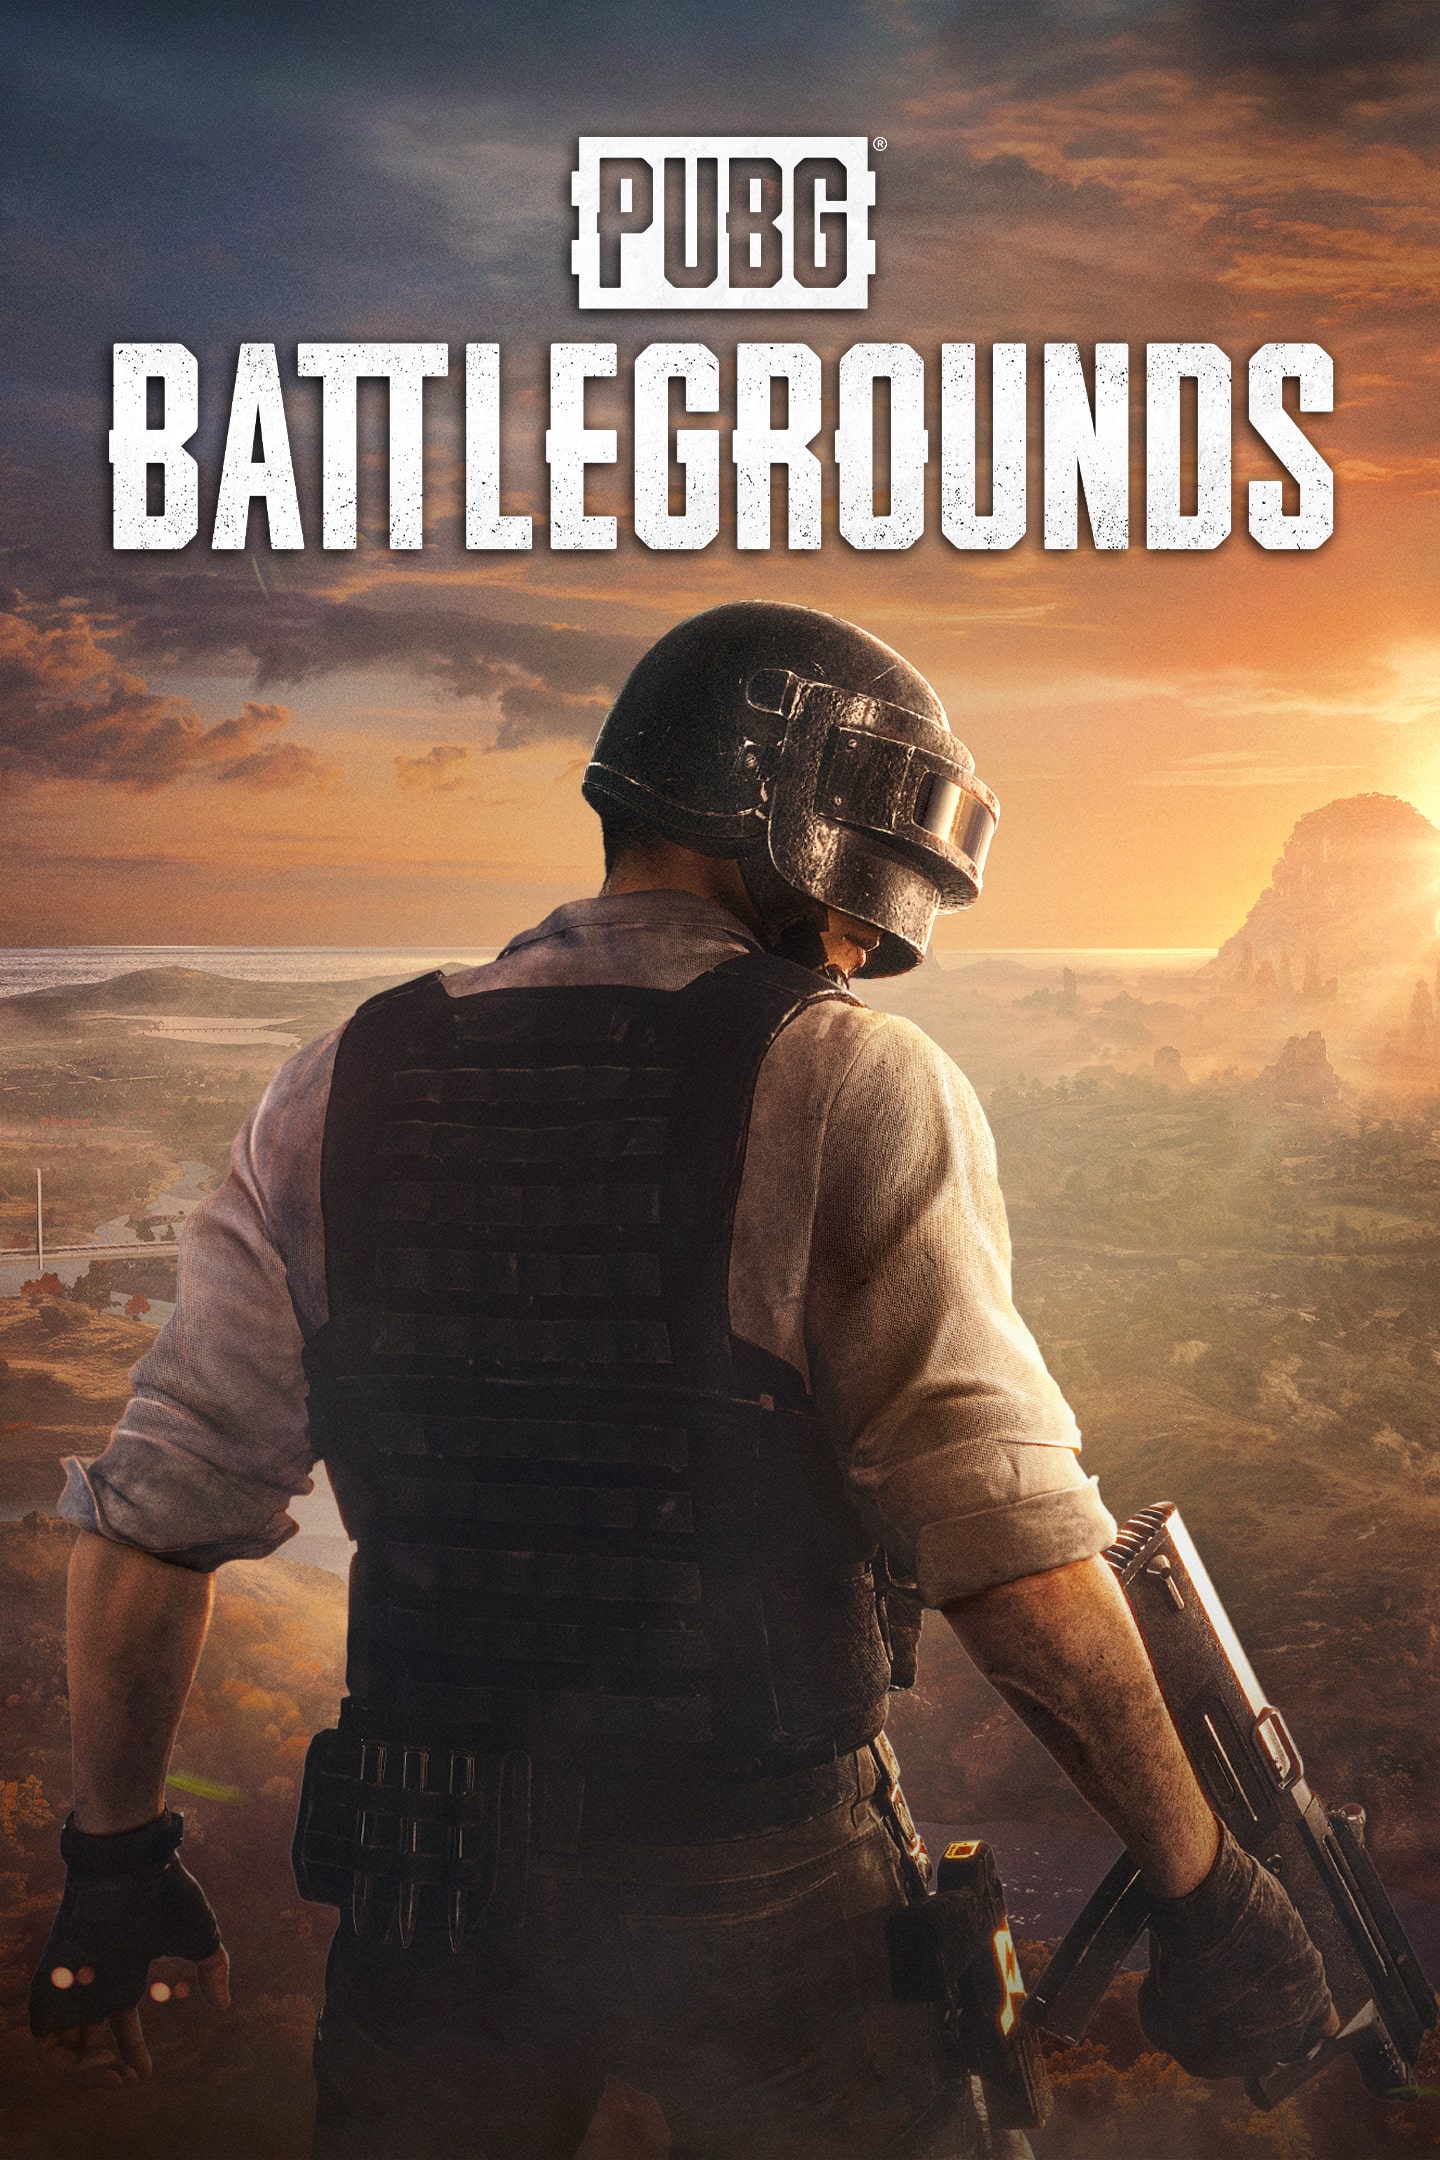 PUBG: Battlegrounds goes free-to-play January 12 – PlayStation.Blog